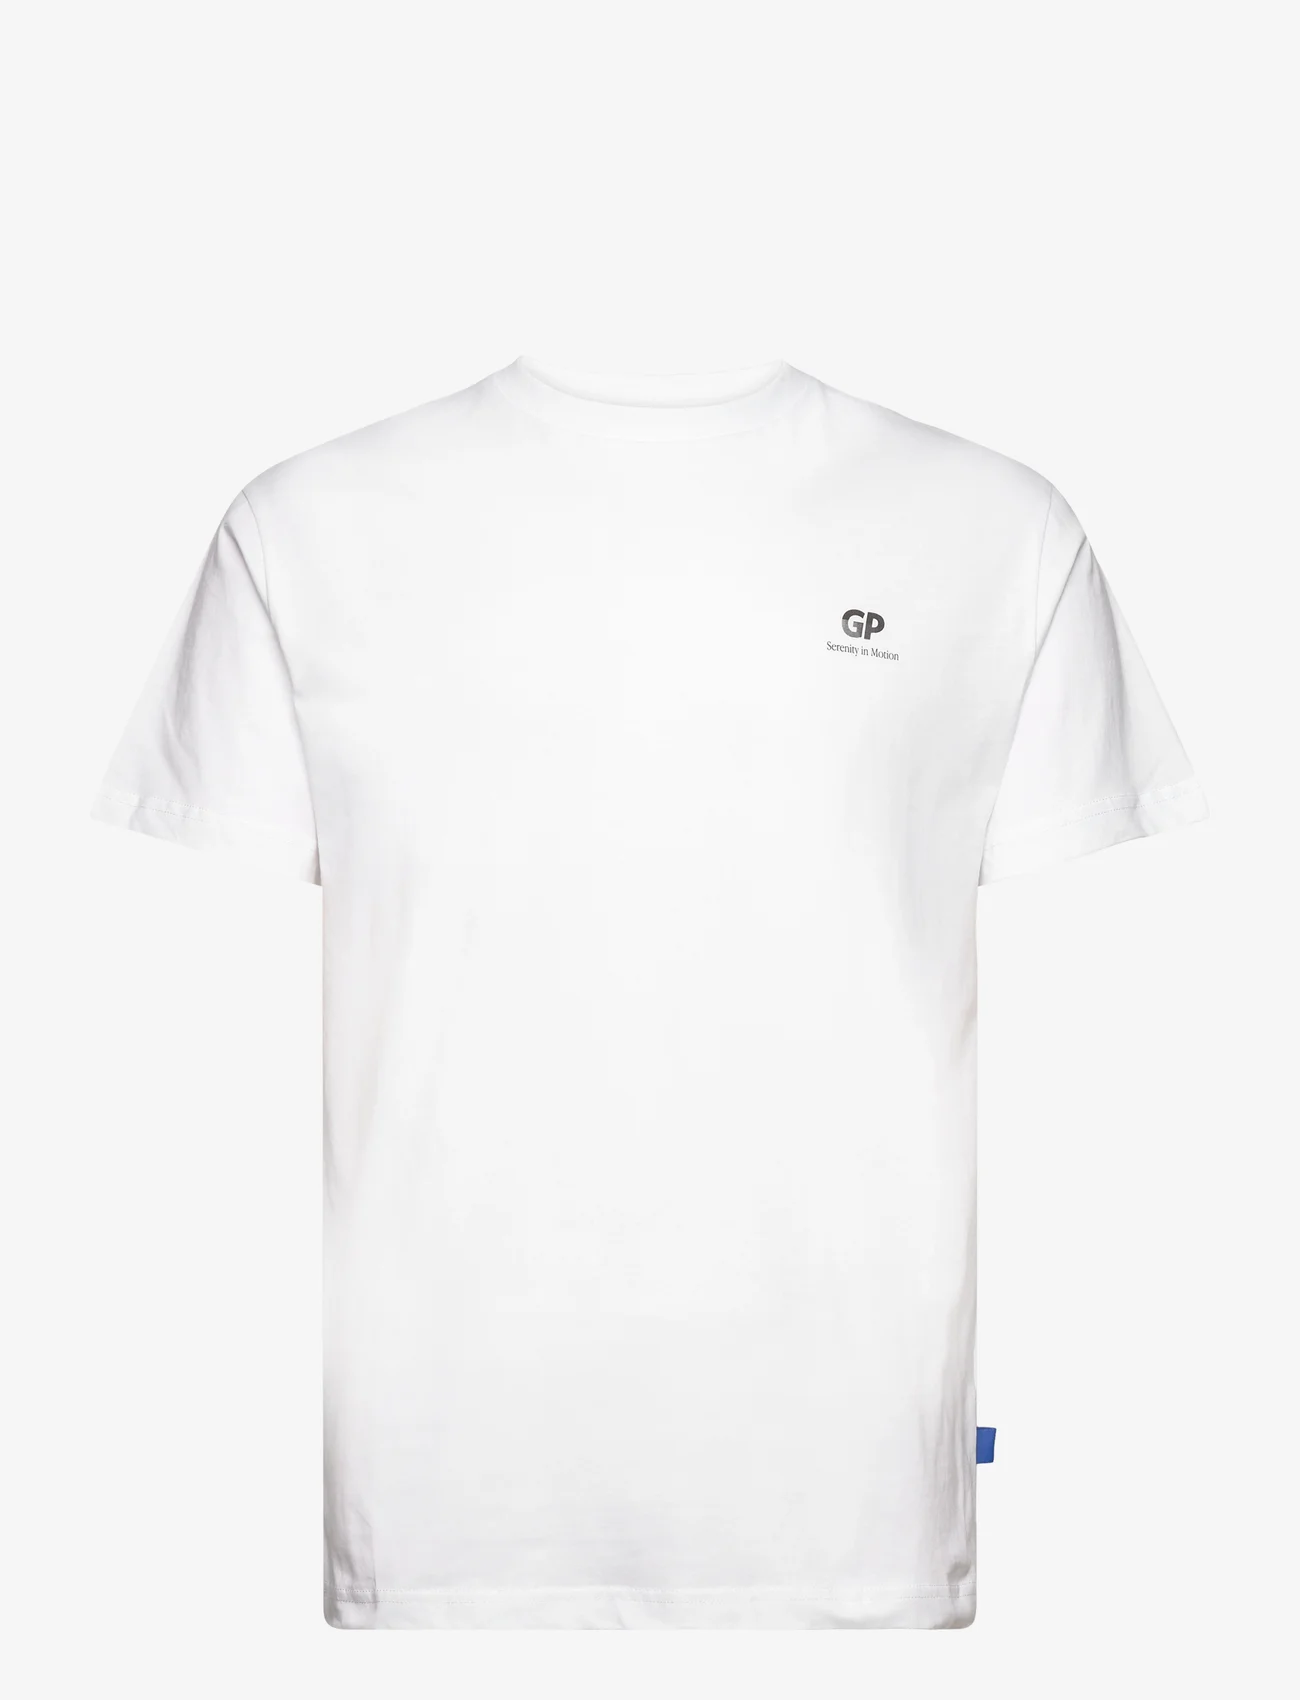 Garment Project - Relaxed Fit Tee - White / Serenity in motion - kortärmade t-shirts - white - 0